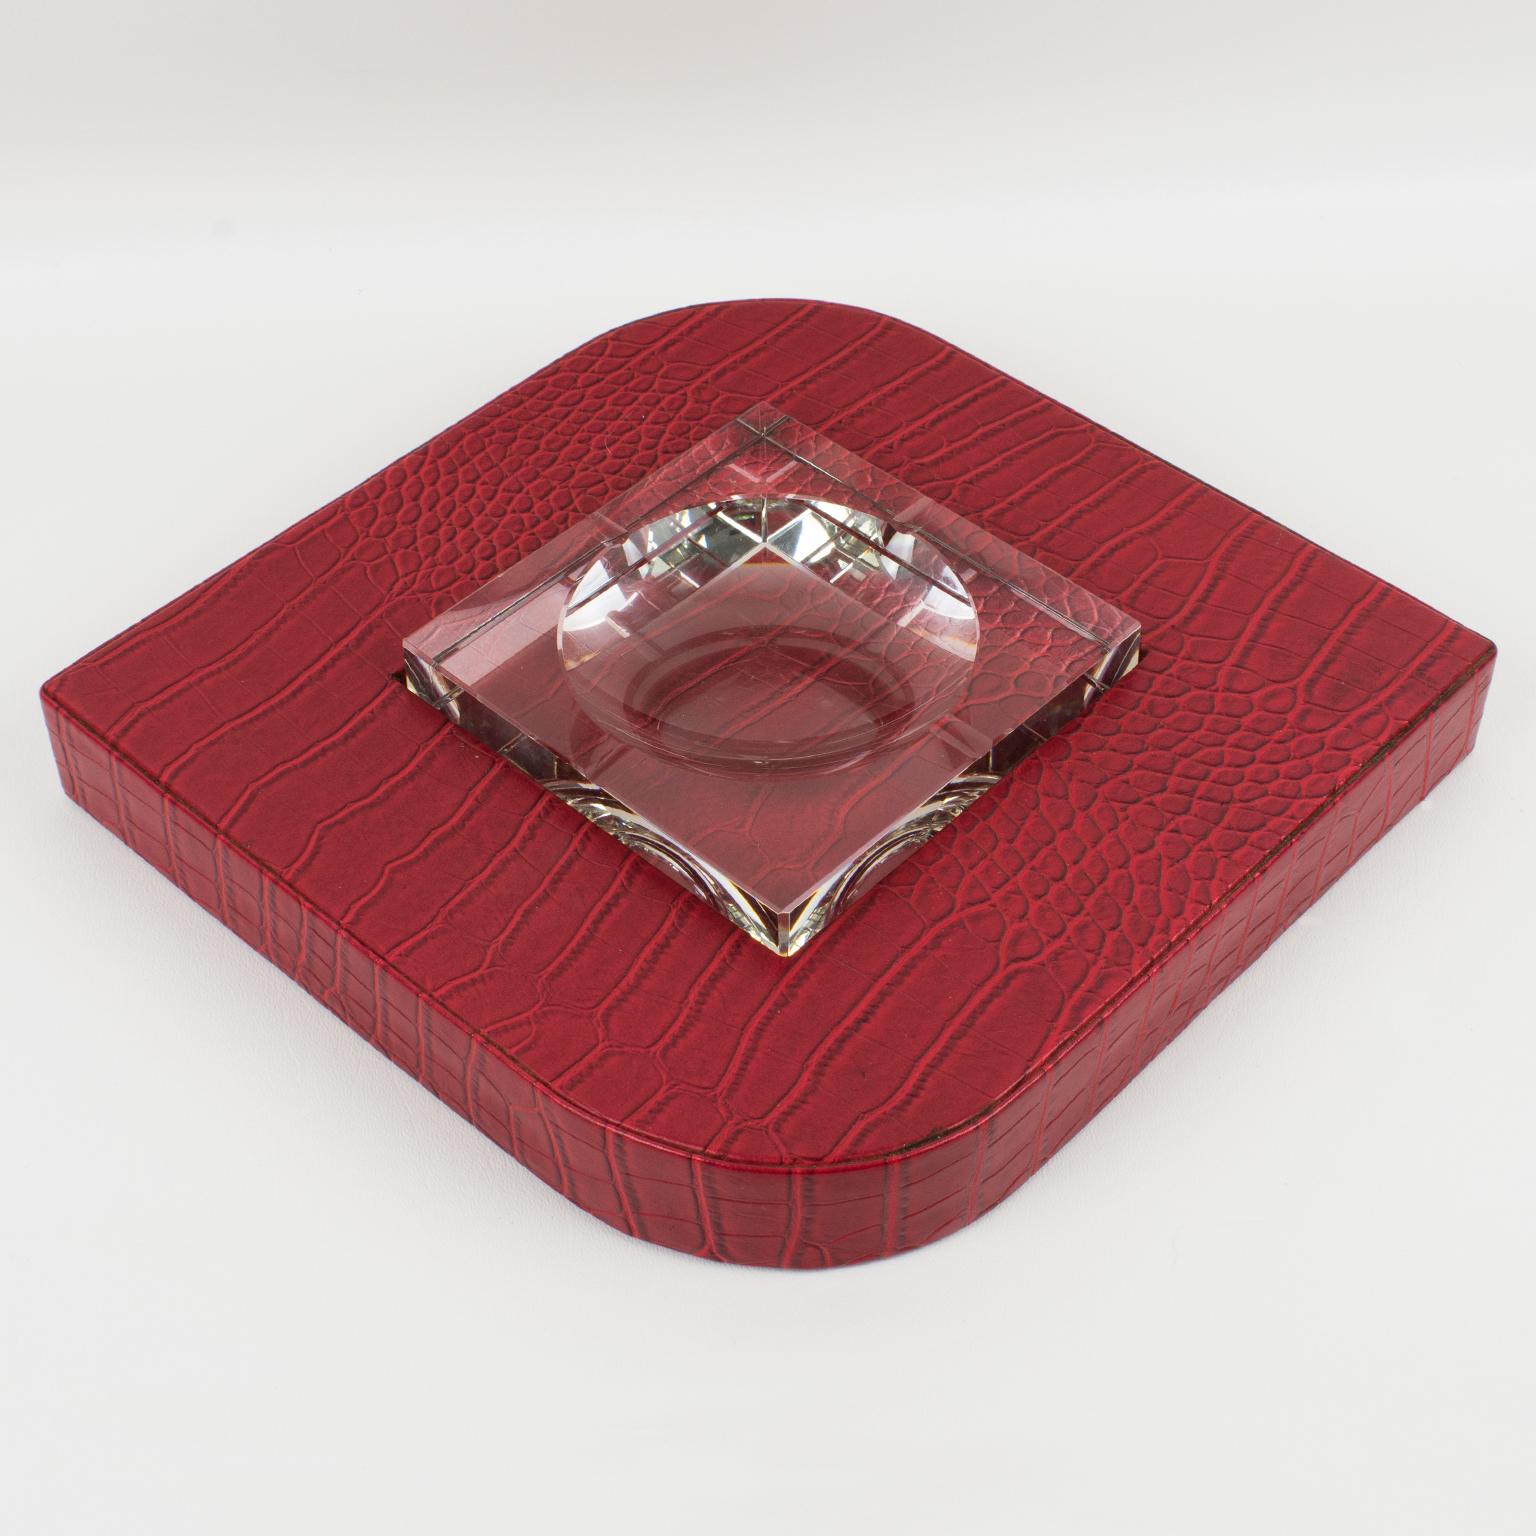 Art Deco Dupre Lafon Style Red Leather and Crystal Cigar Ashtray Catchall Vide Poche For Sale